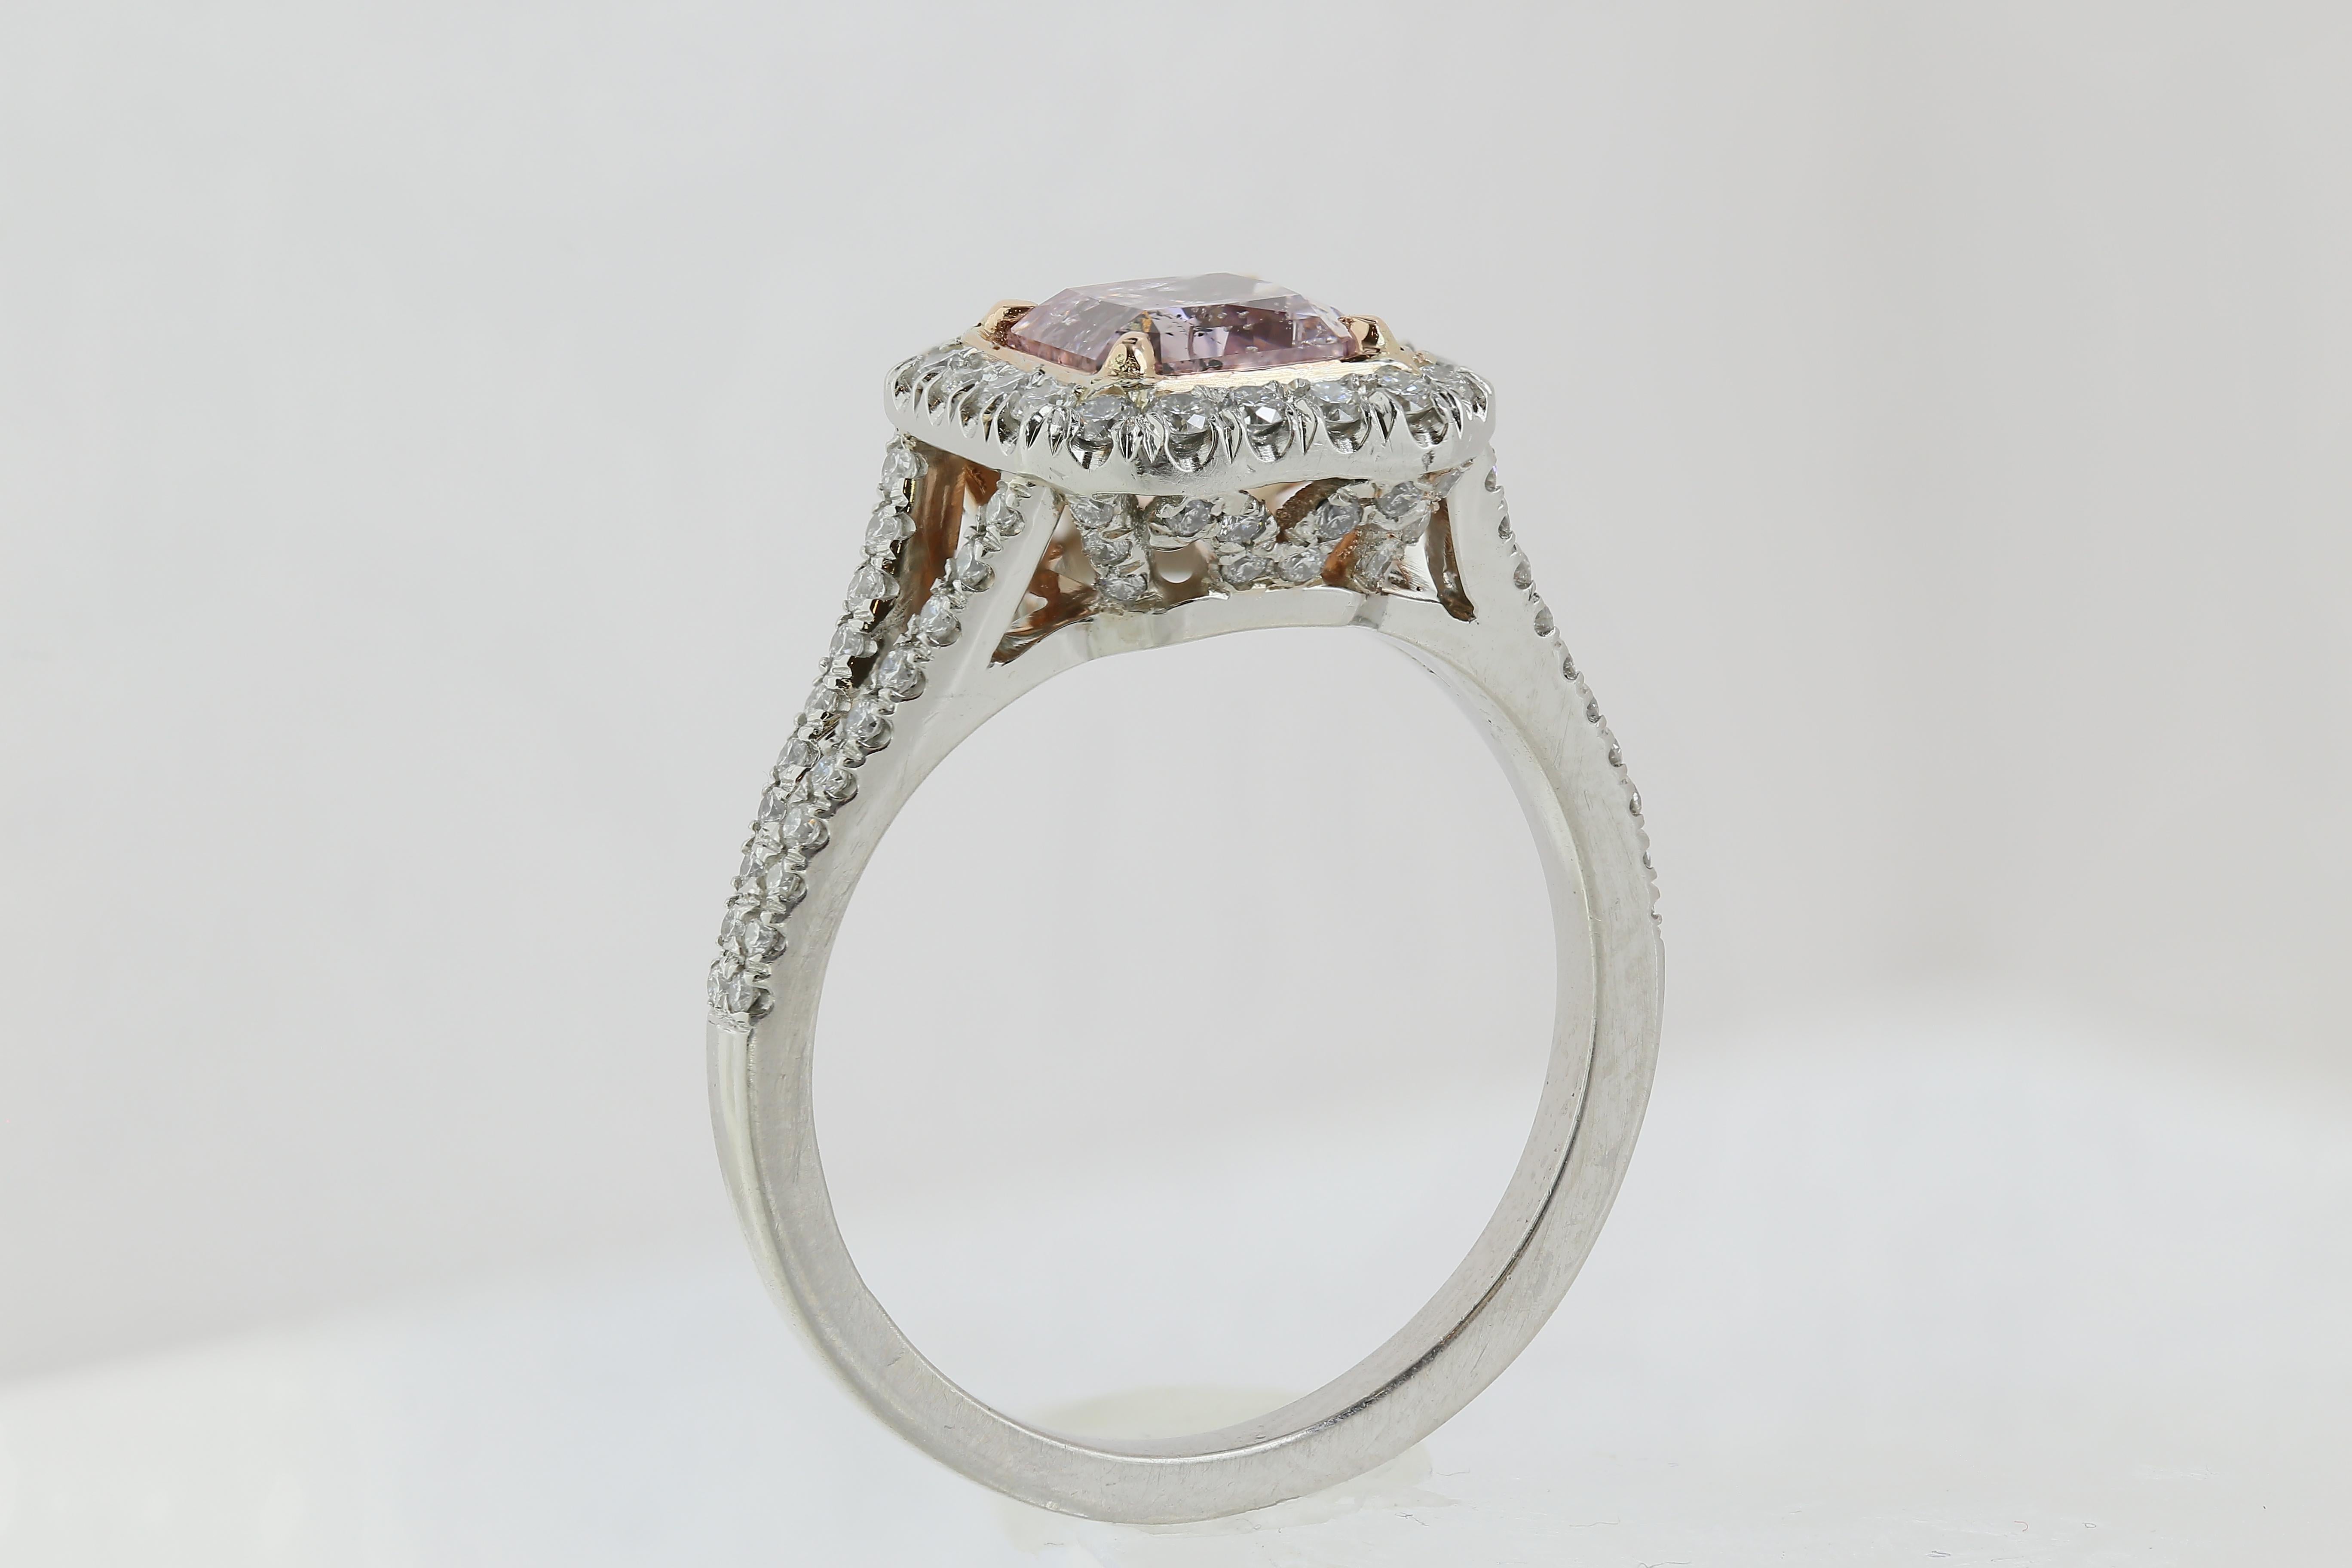 Contemporary GIA Certified 1.40 Carat Fancy Purple-Pink Radiant Diamond with Halo Setting For Sale